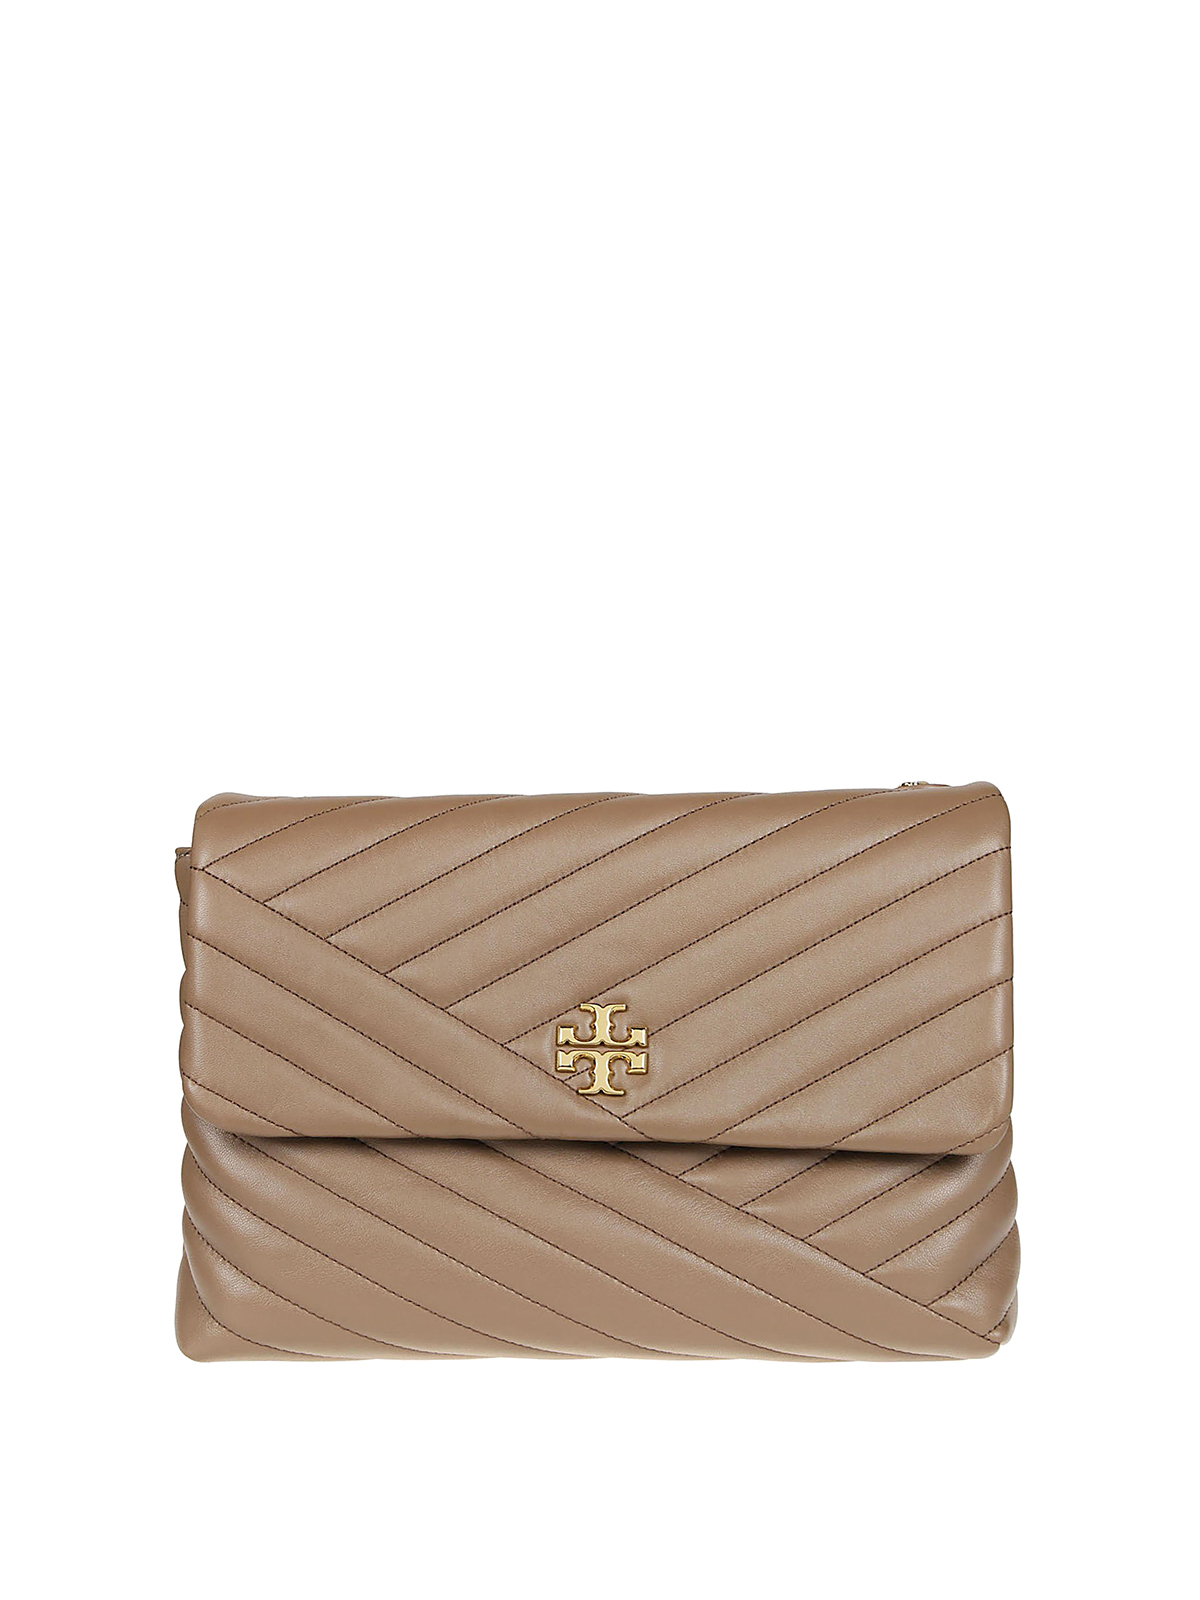 Tory Burch, Bags, Tory Burch Kira Chevron Quilted Leather Bag